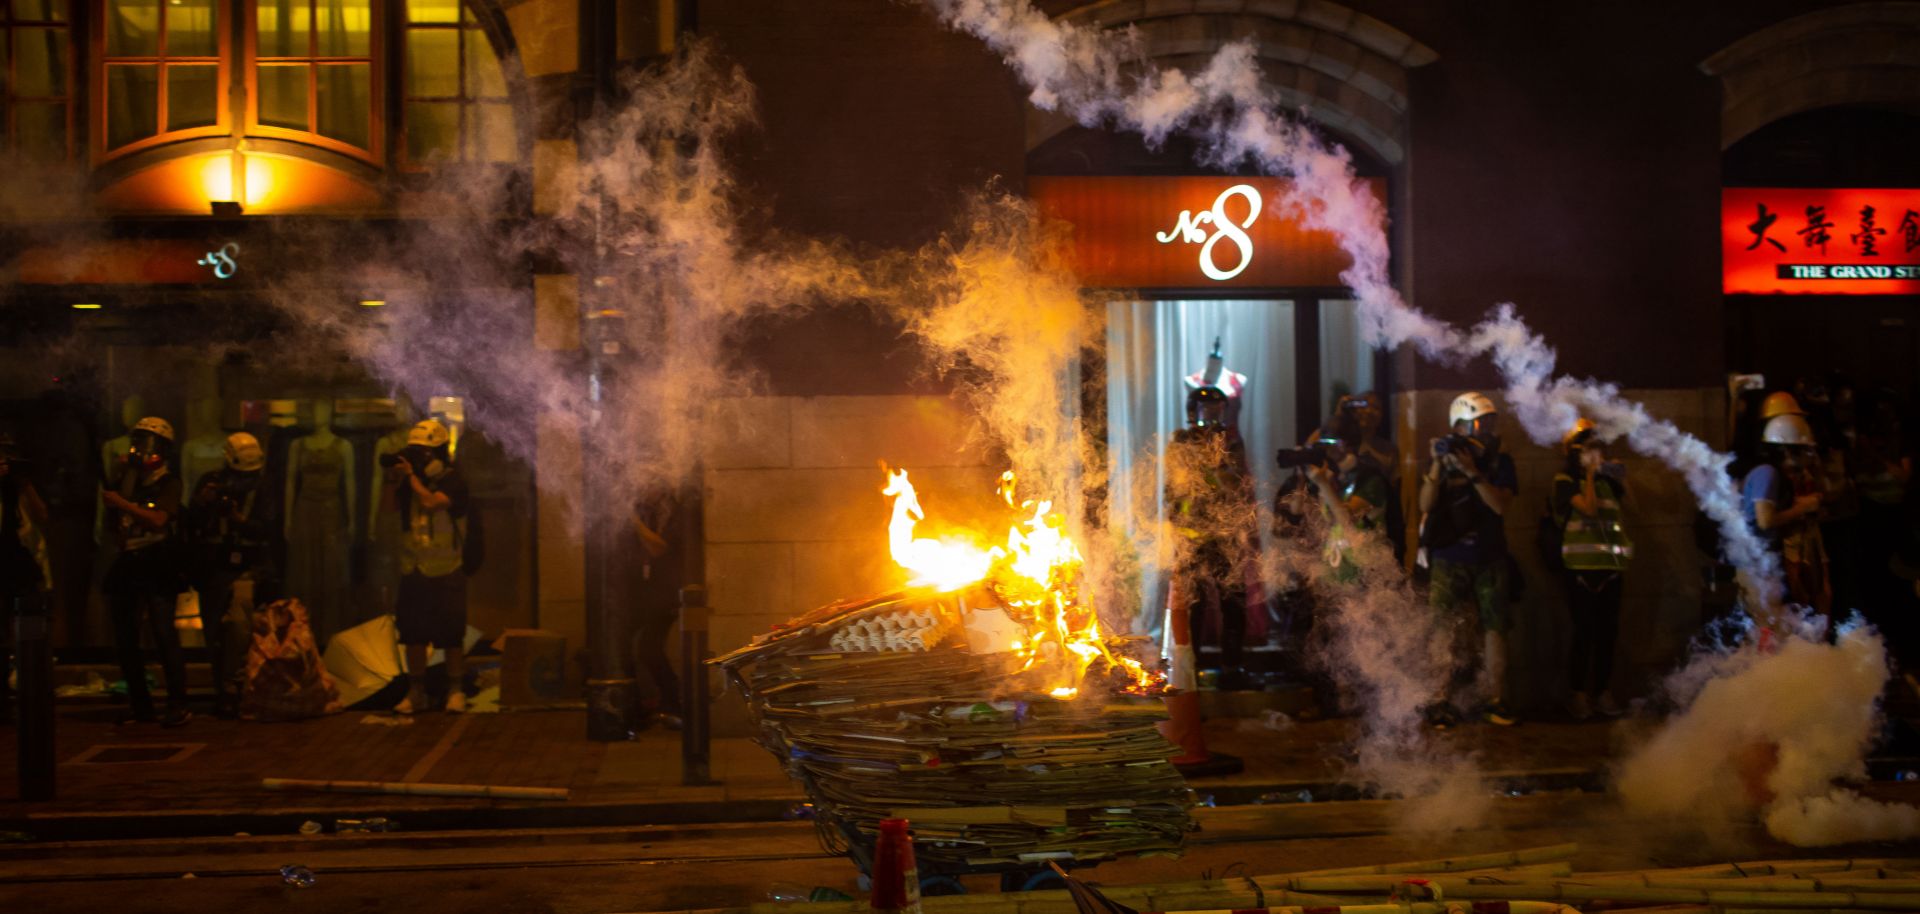 A burning cart is seen during a demonstration in the area of Sheung Wan on July 28, 2019, in Hong Kong. 